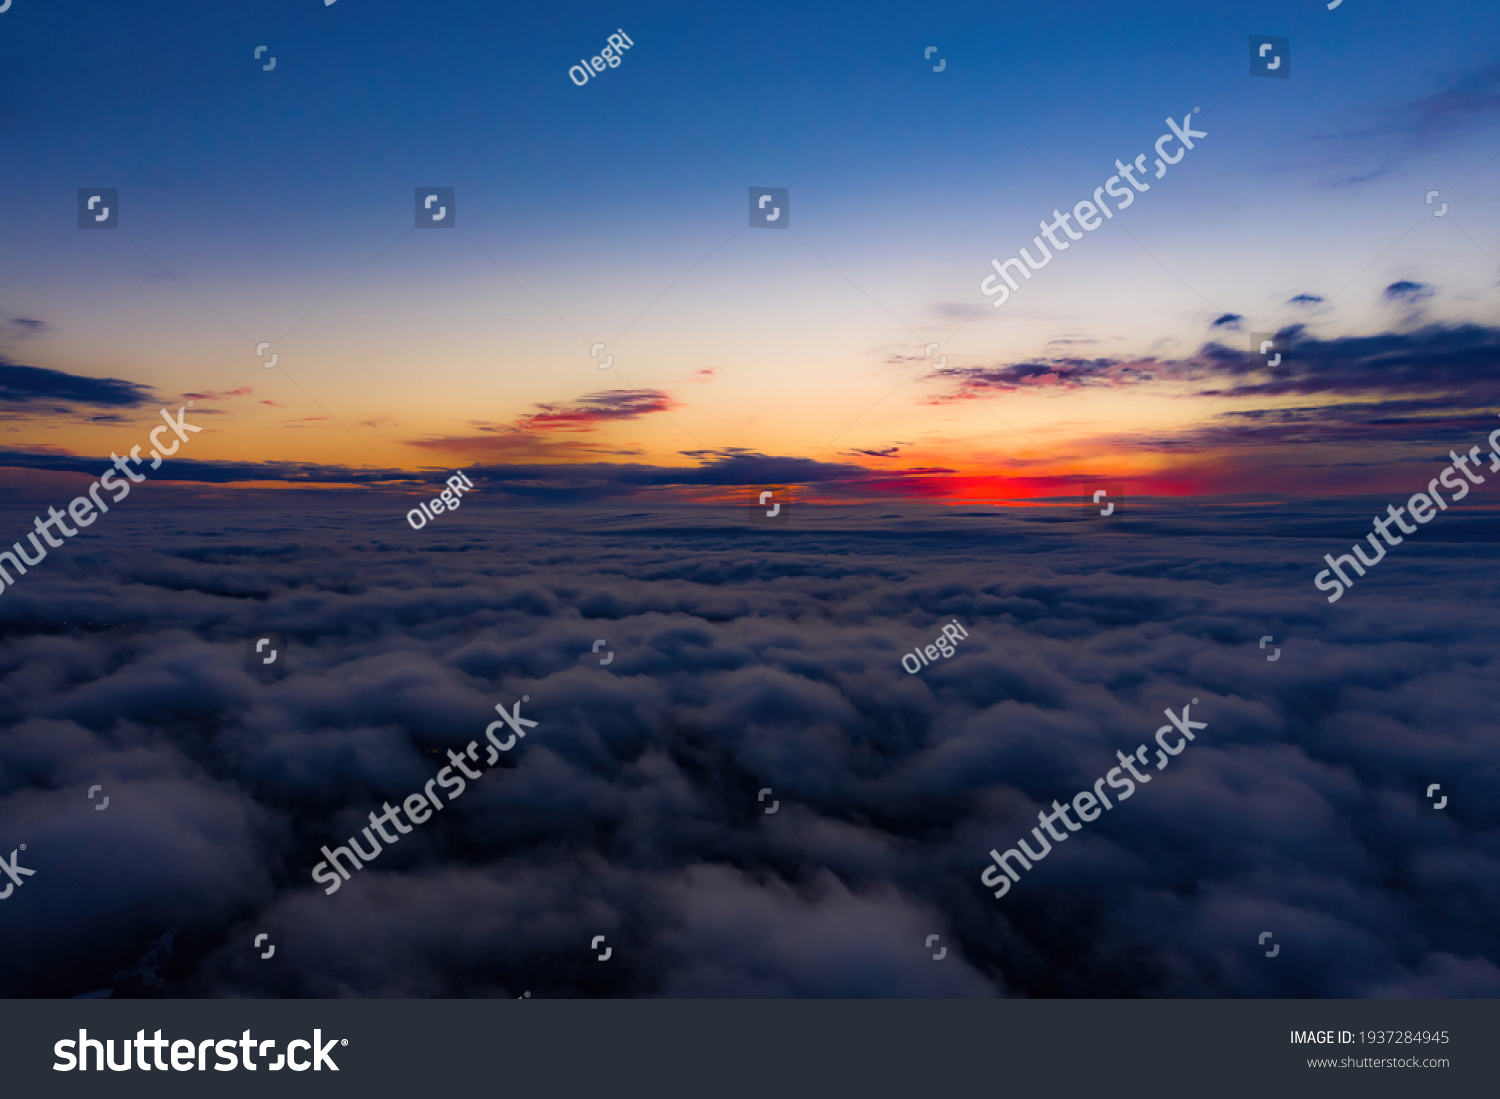 Aerial sunset view over the Blue Ridge Mountains from the cockpit of a private aircraft. Sky with clouds. Sky background #1937284945